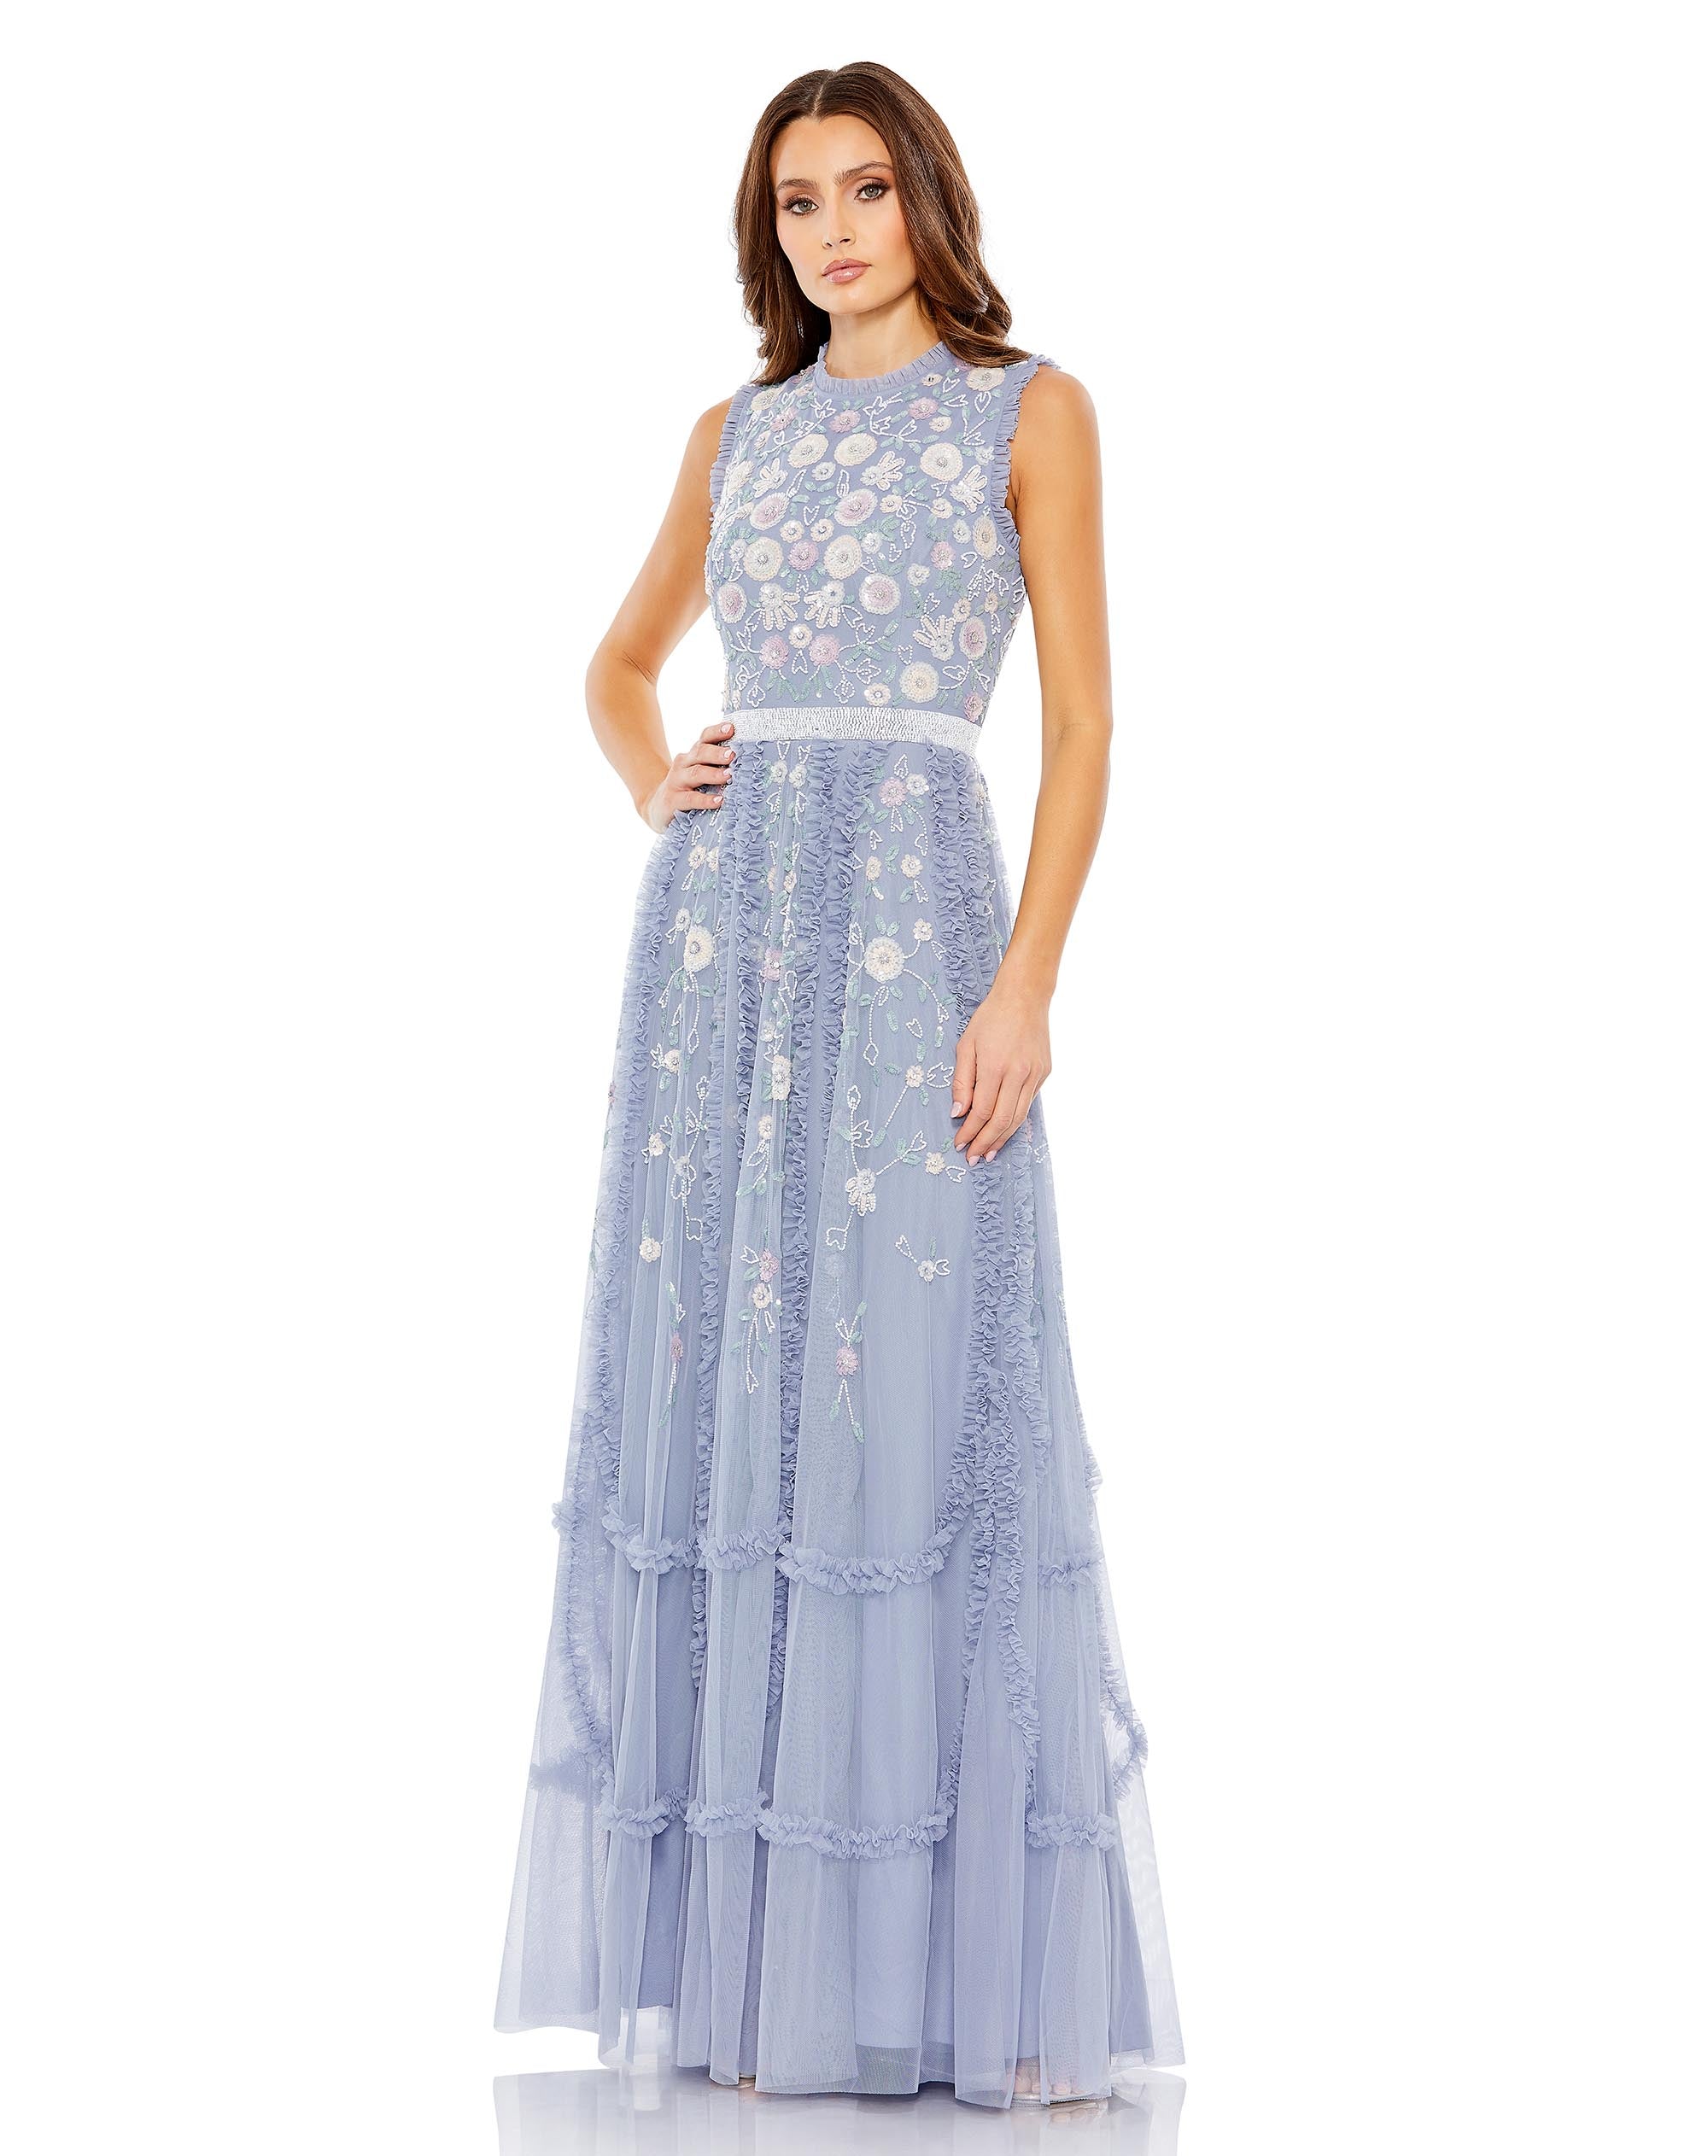 Embellished High Neck Sleeveless Ruffled Gown - FINAL SALE